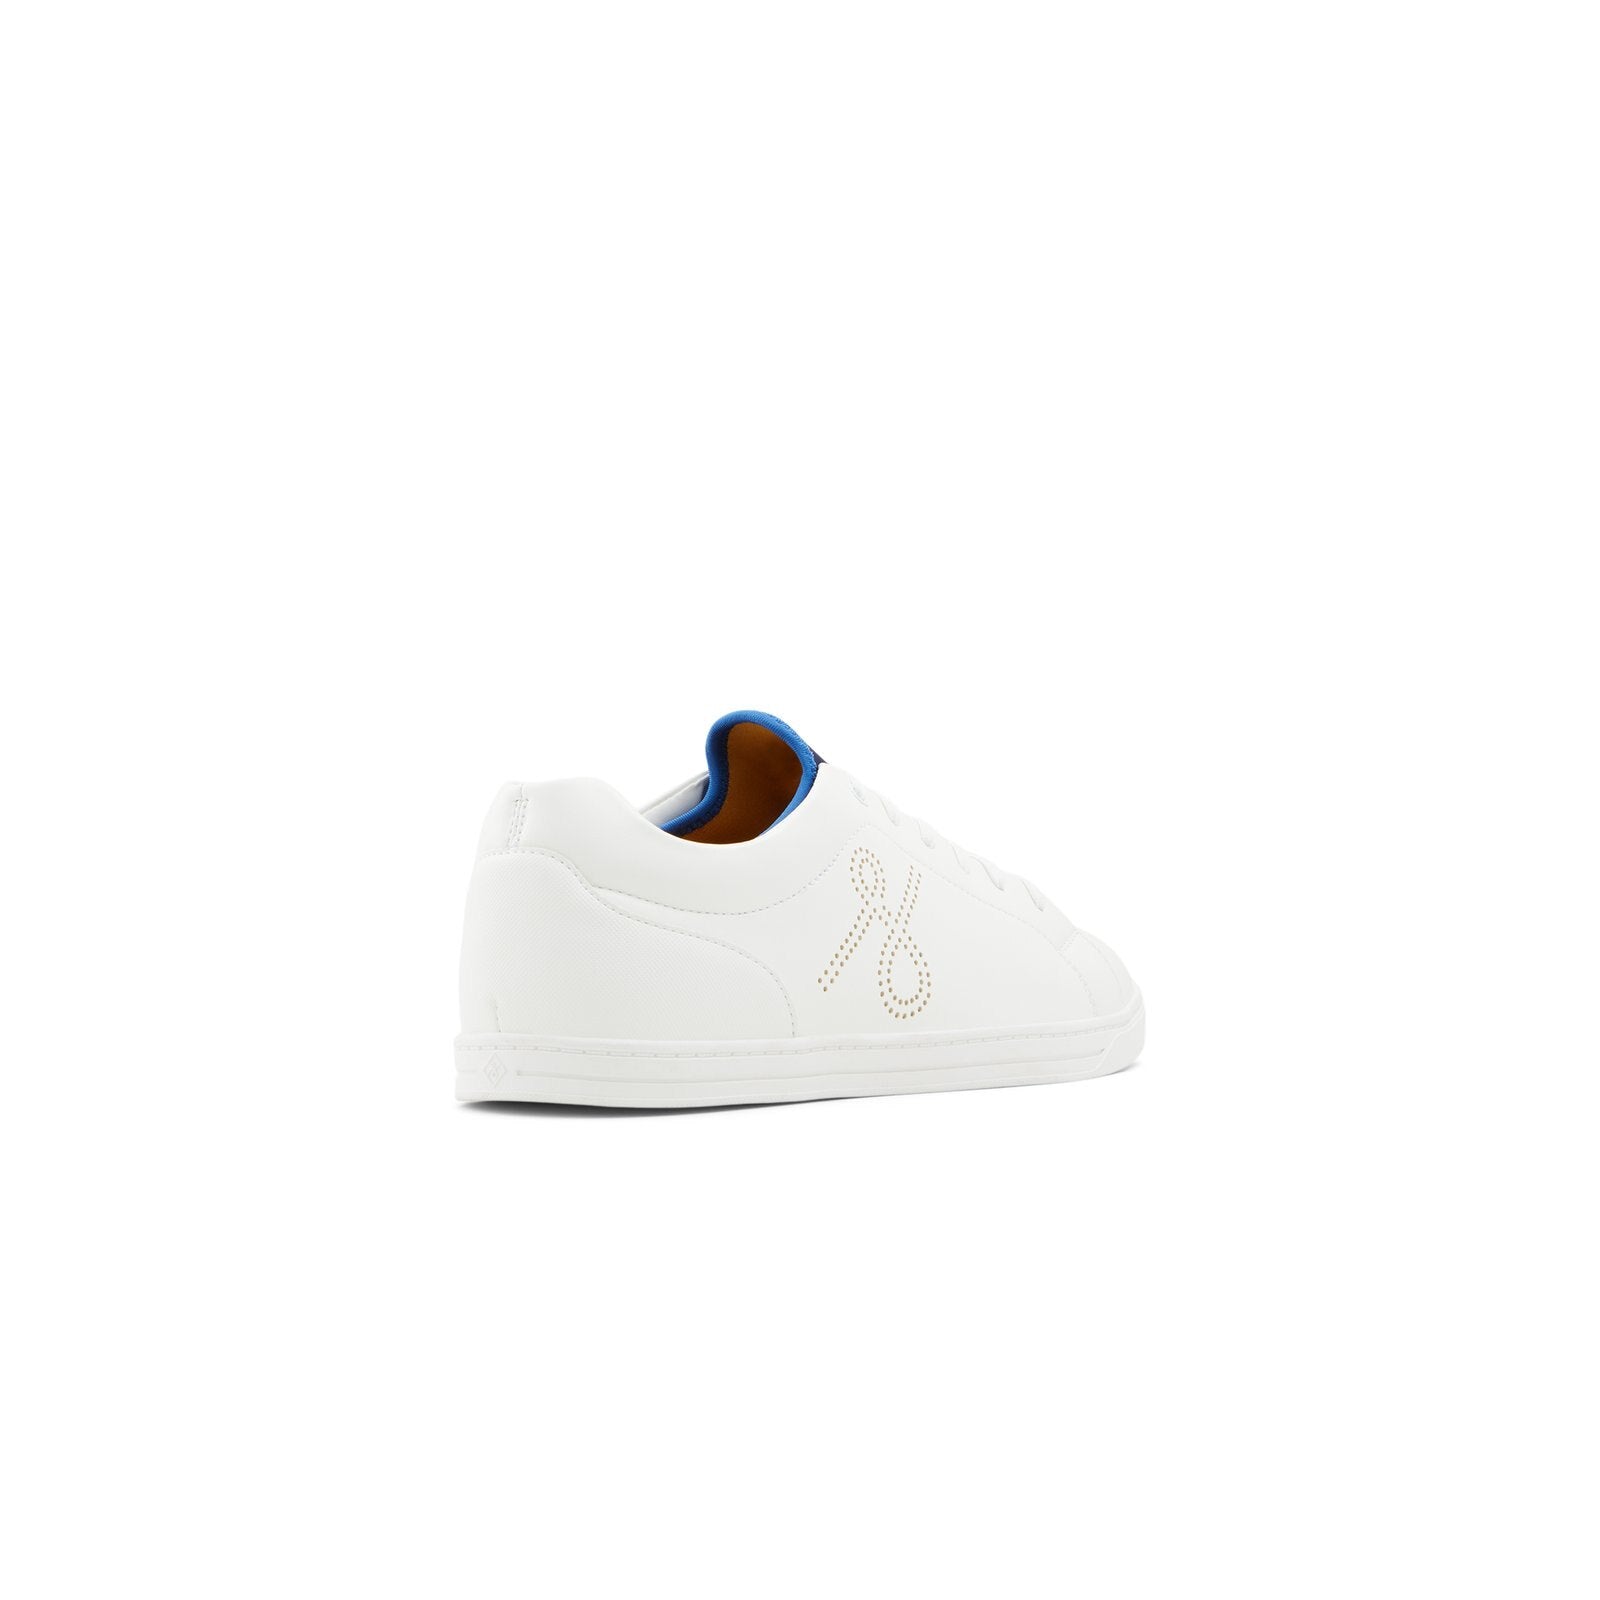 Luther / Casual Shoes Men Shoes - White - CALL IT SPRING KSA